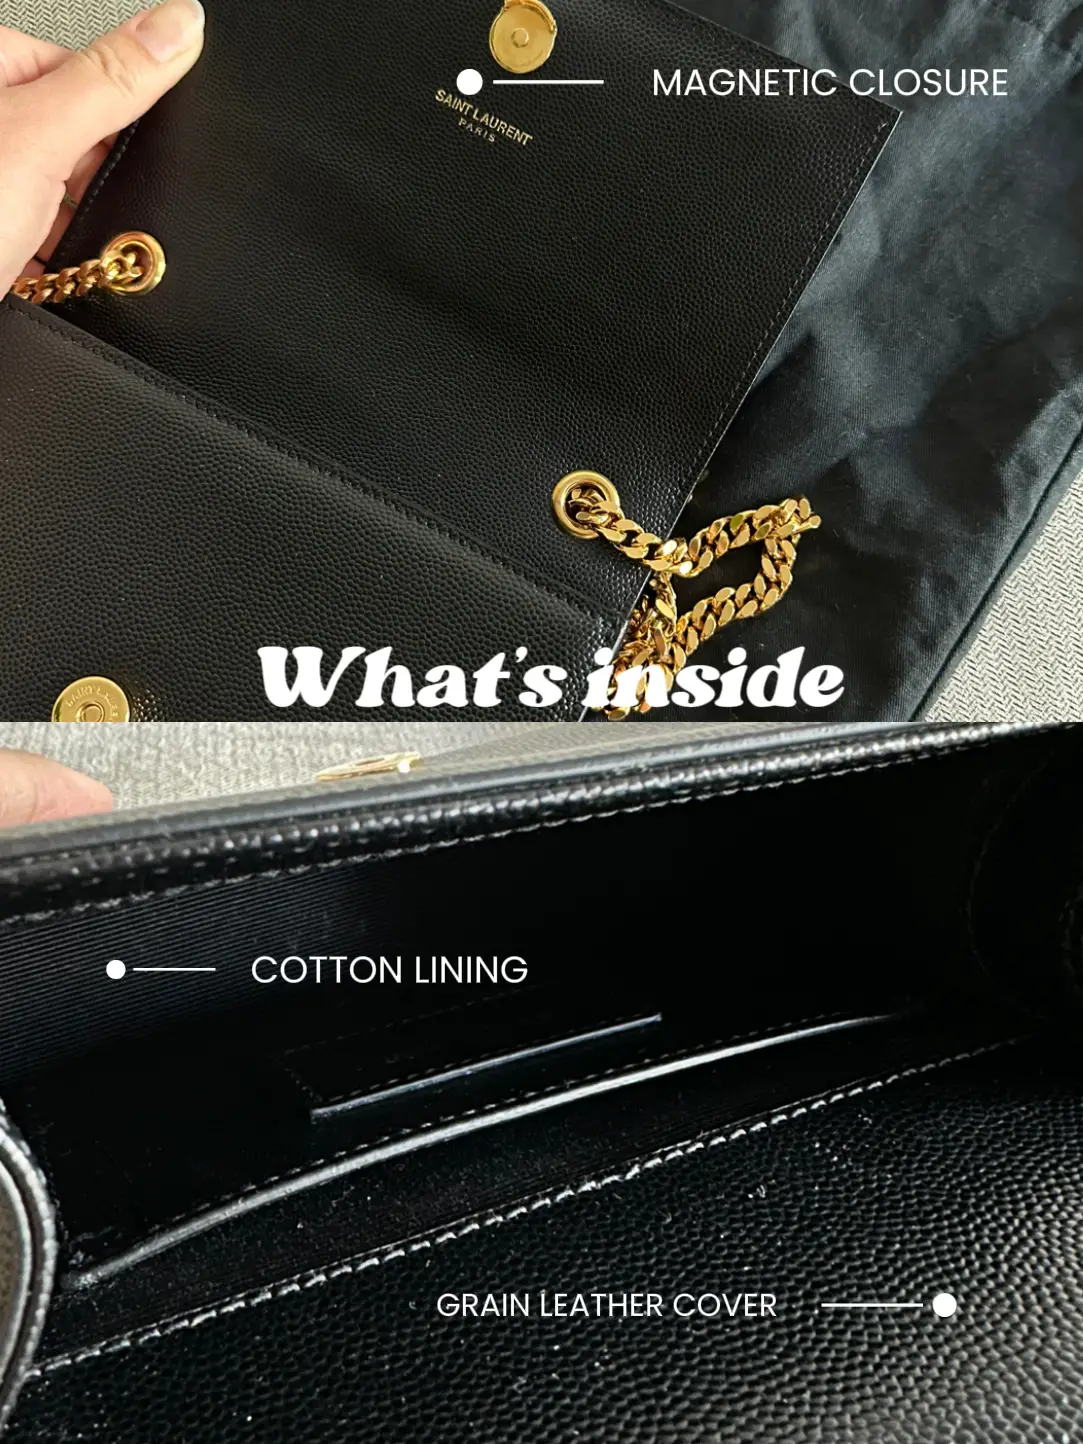 Leather Ysl Wallet on A Chain Bag